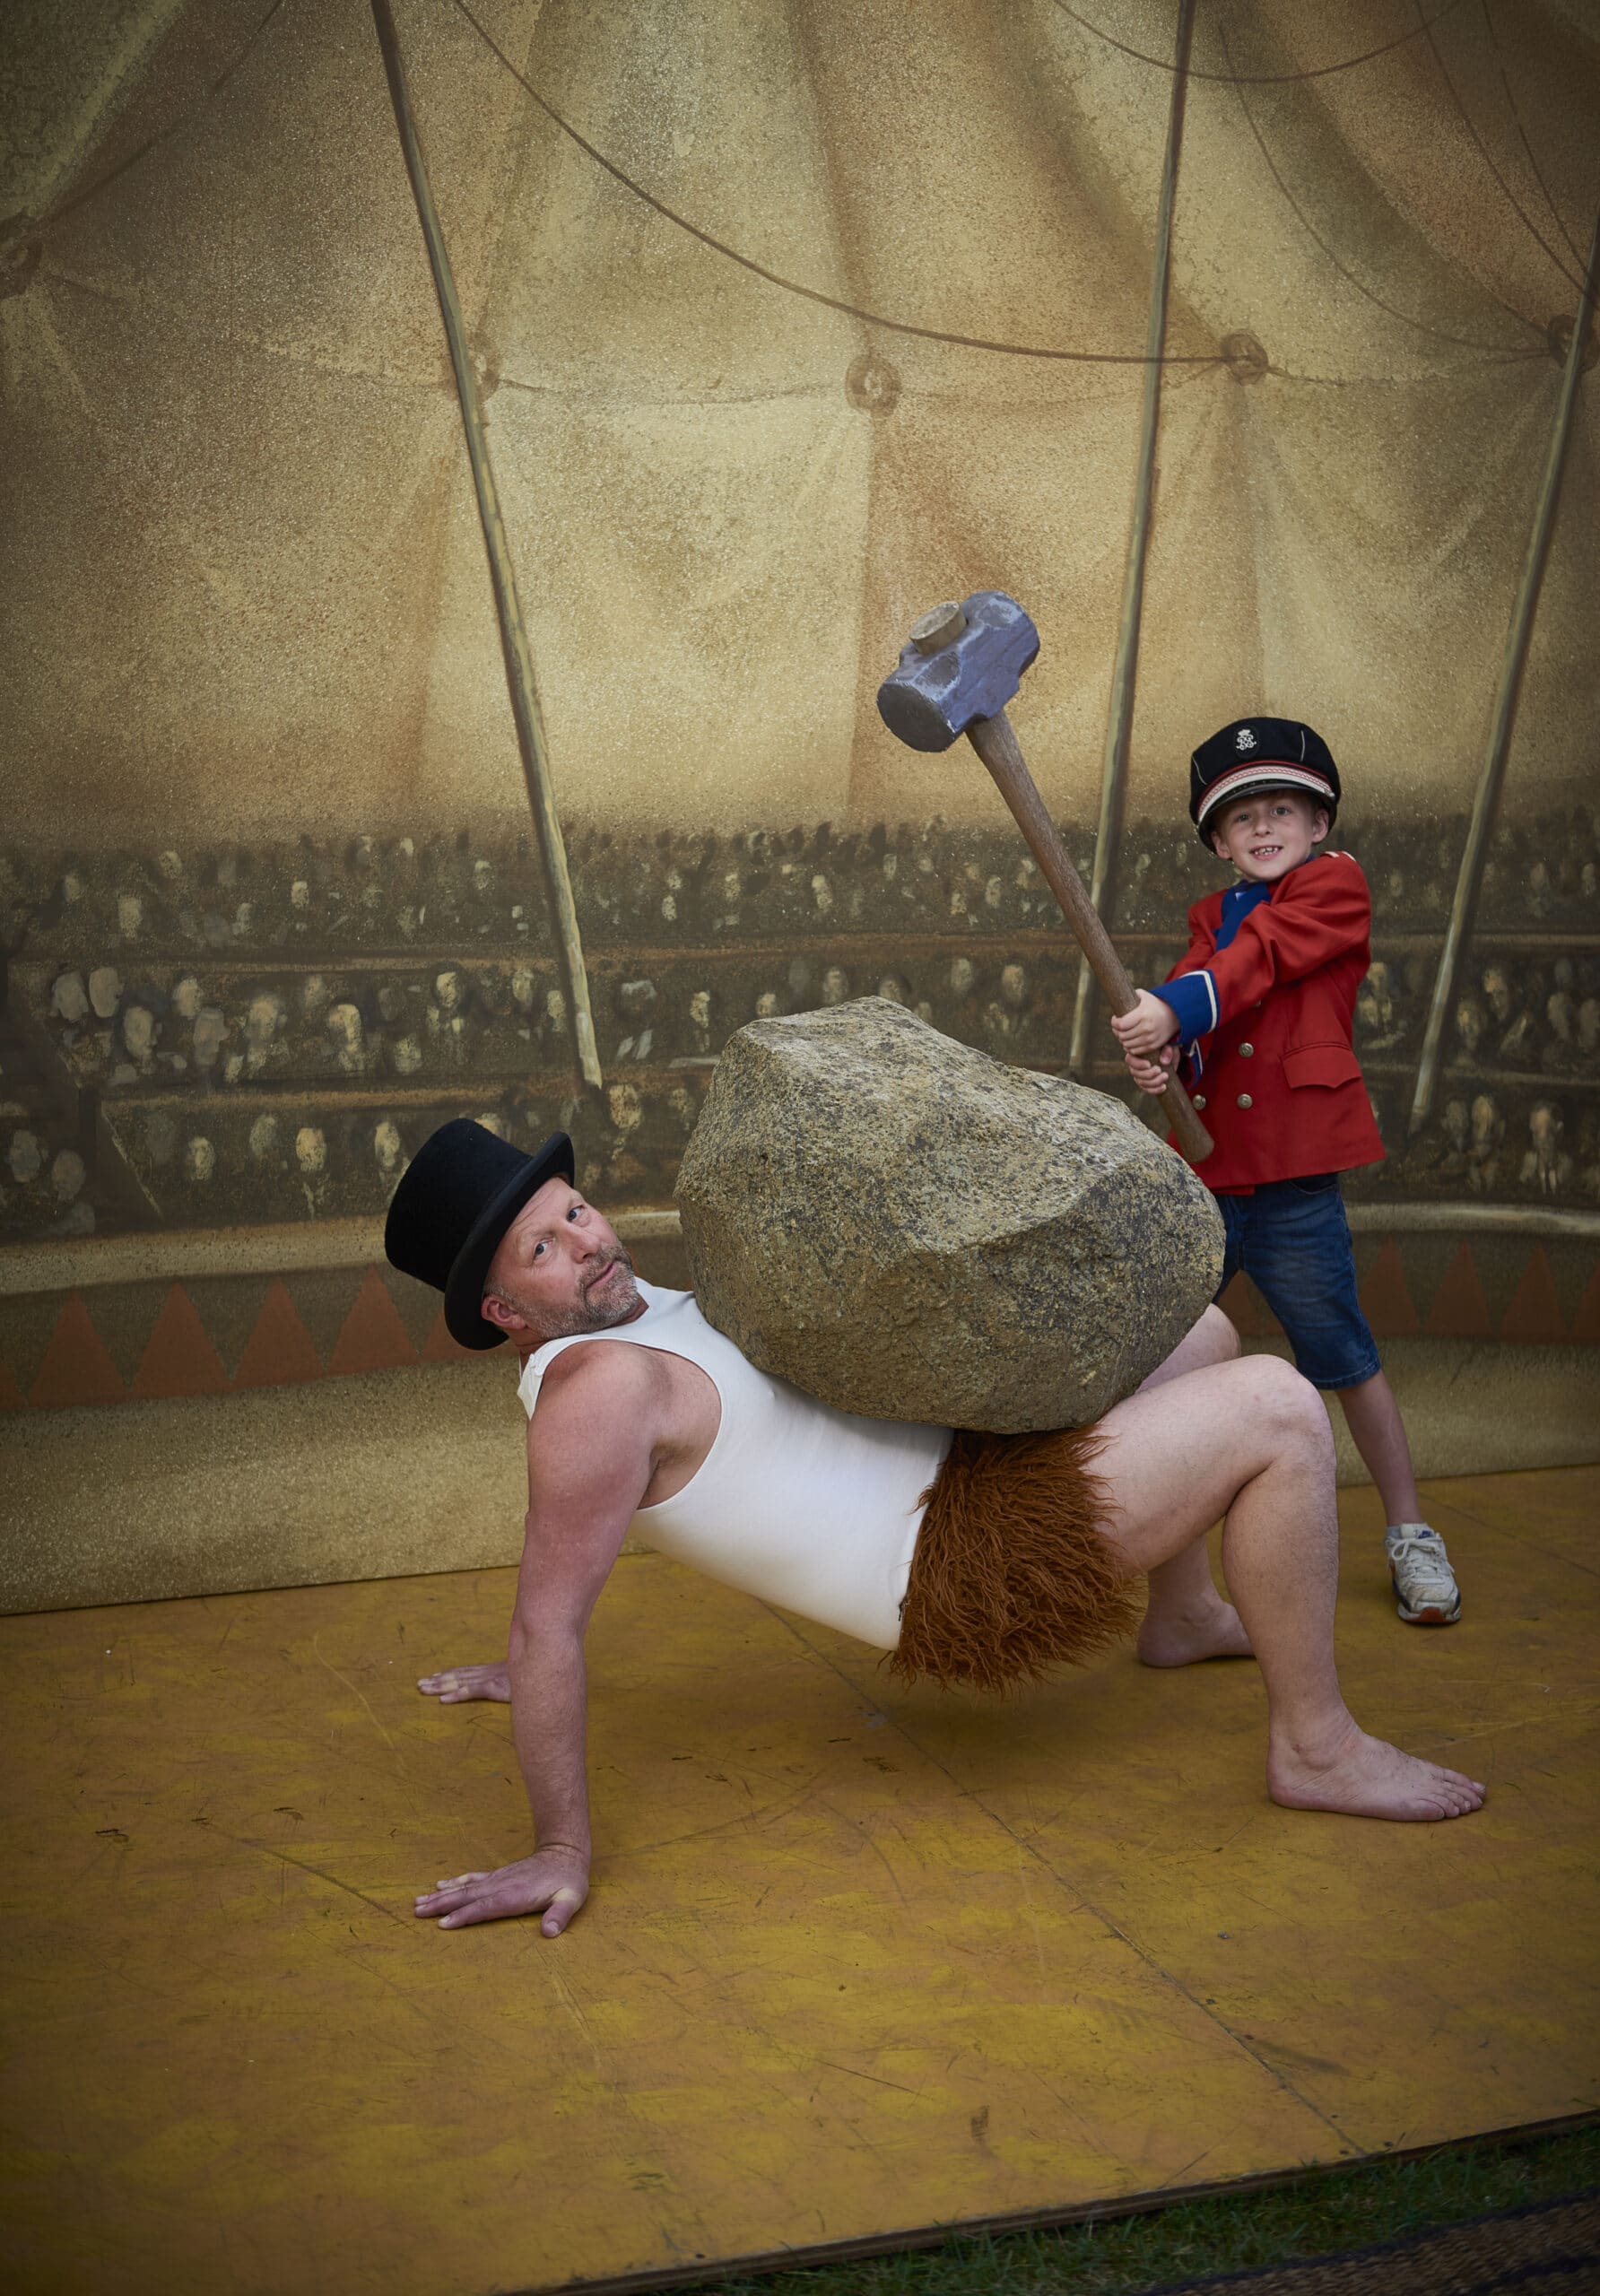 A man dressed as a strong man and a boy dressed as a ring master posing with a giant rock and hammer